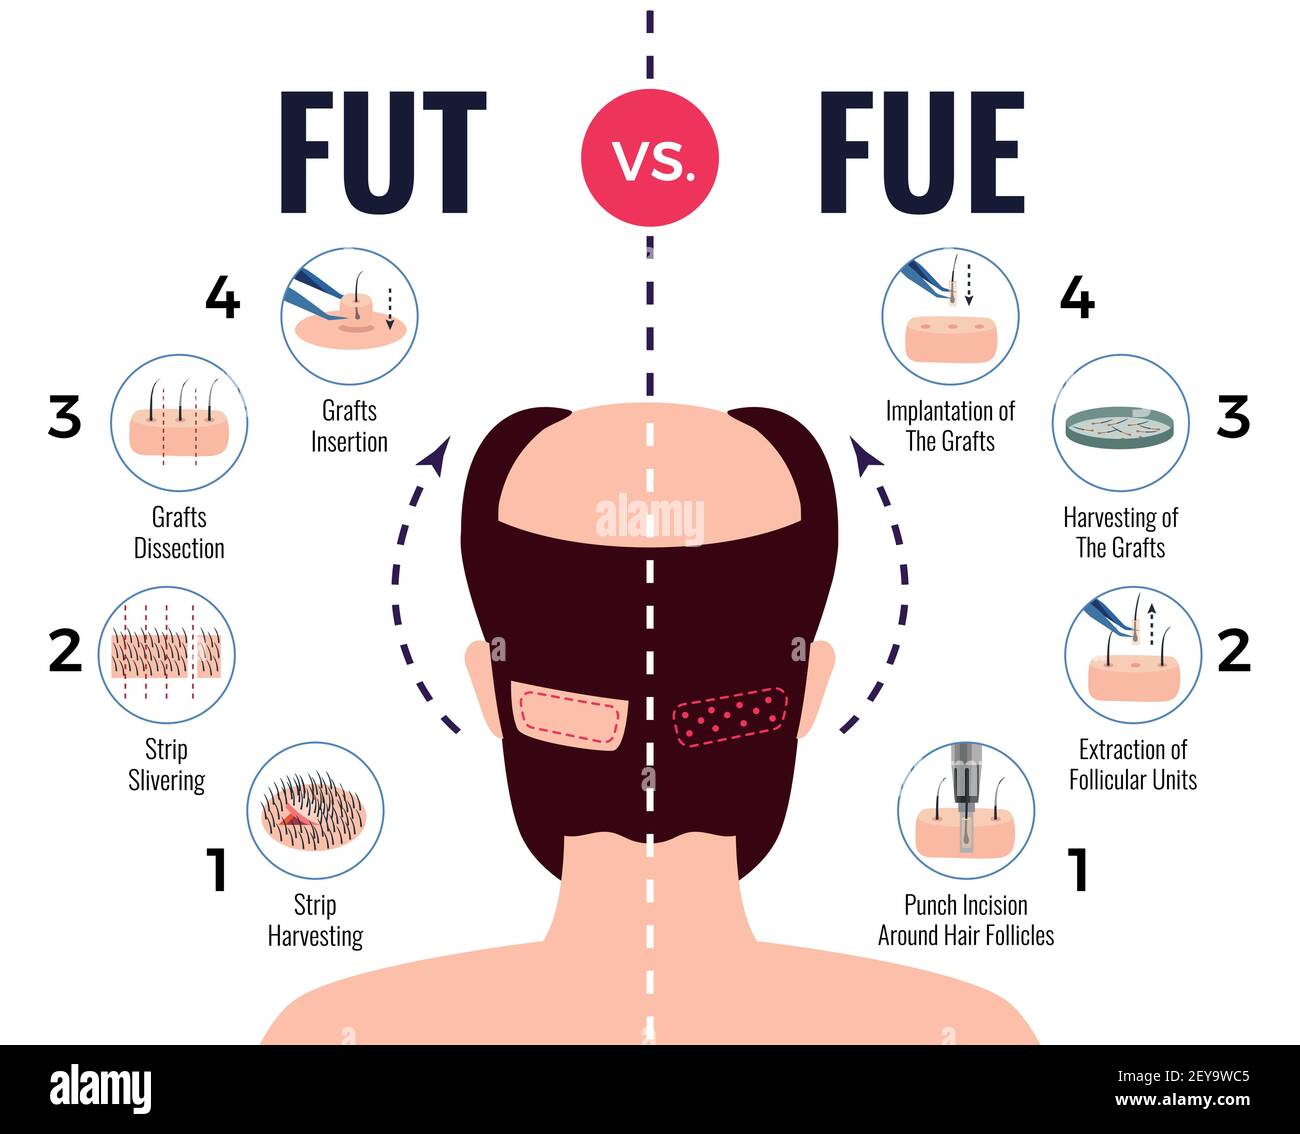 Methods of hair transplantation fut vs fue poster with infographic elements on white background vector illustration Stock Vector